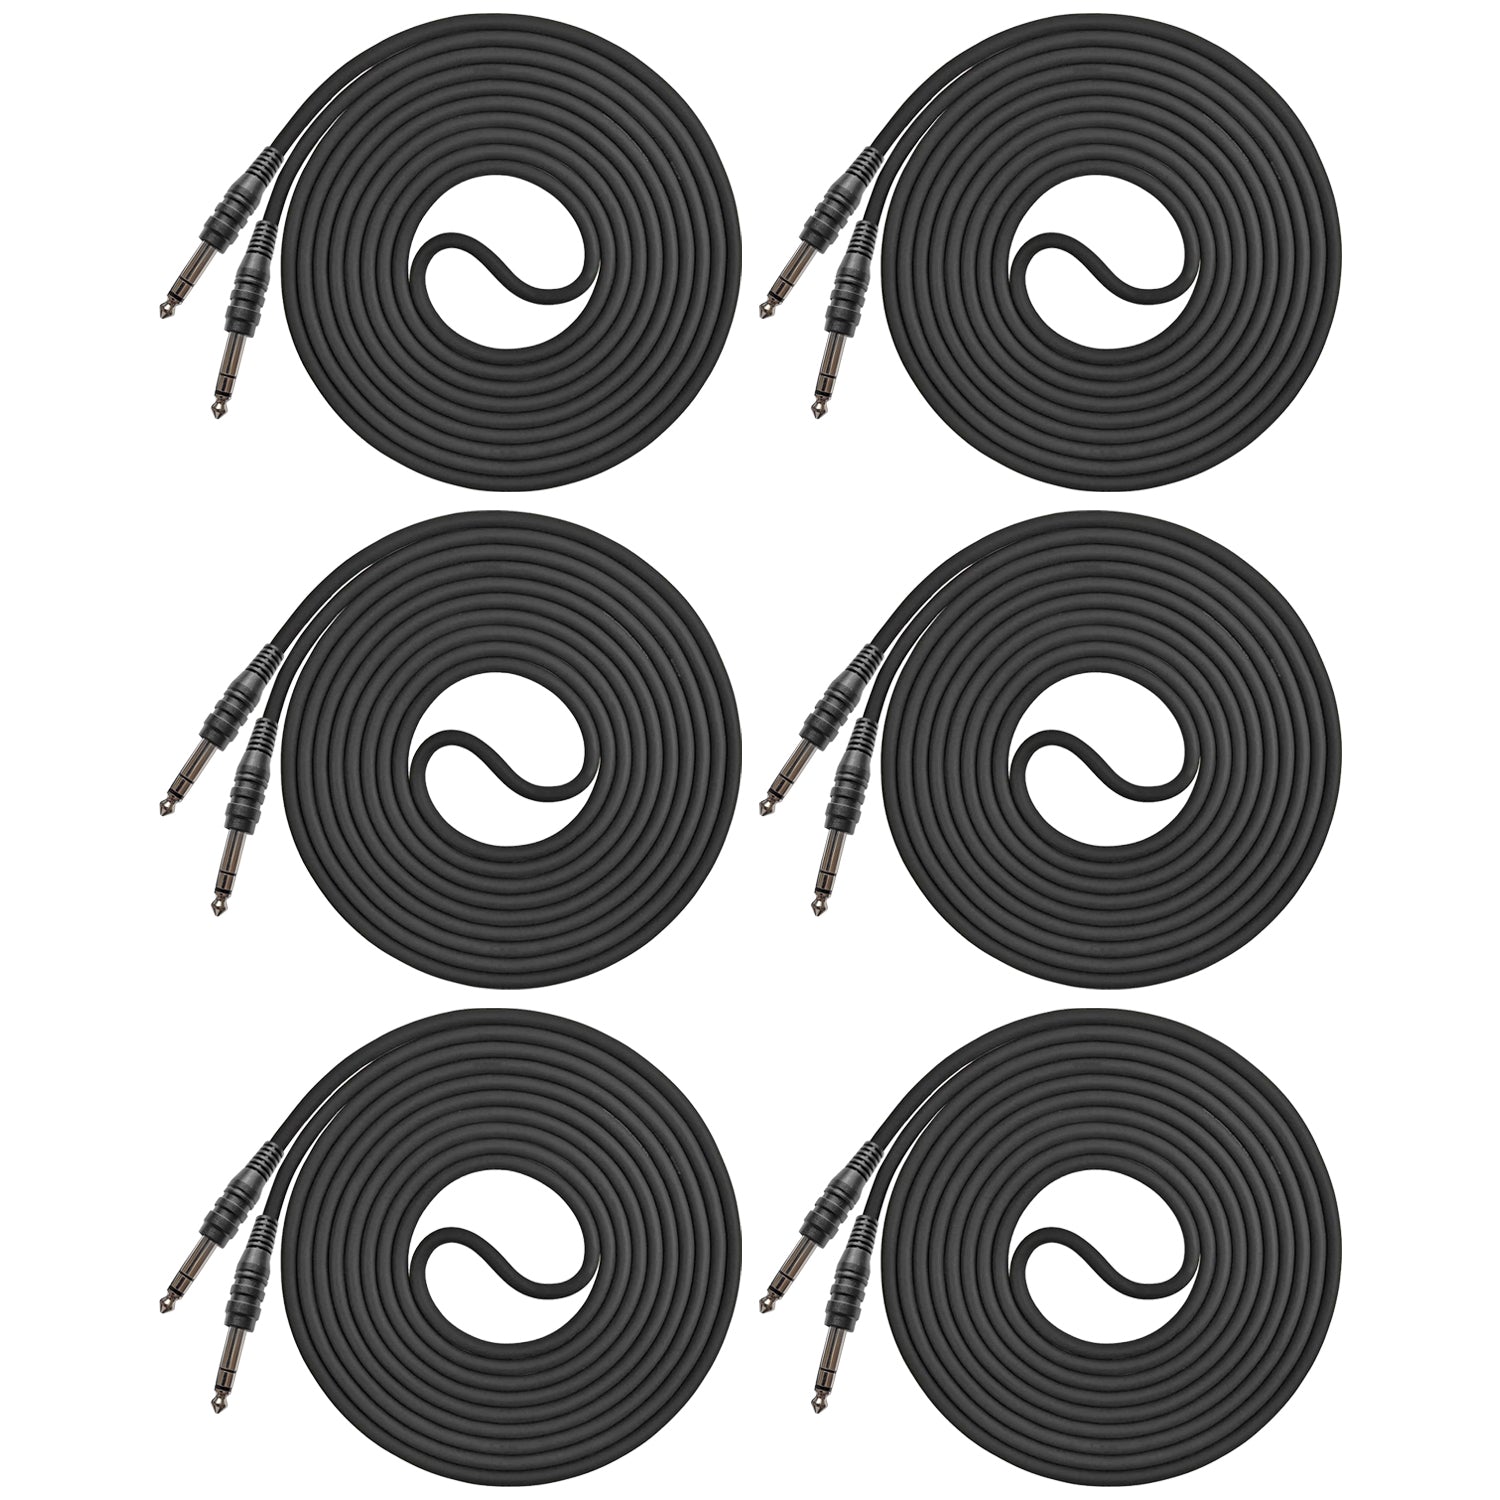 AxcessAbles 1/4 Inch TRS Instrument Cable 15ft - 6 Pack | 6.35mm Male Jack Stereo Audio Cord | 15ft TRS to TRS Balanced Patch Cables (6-Pack)